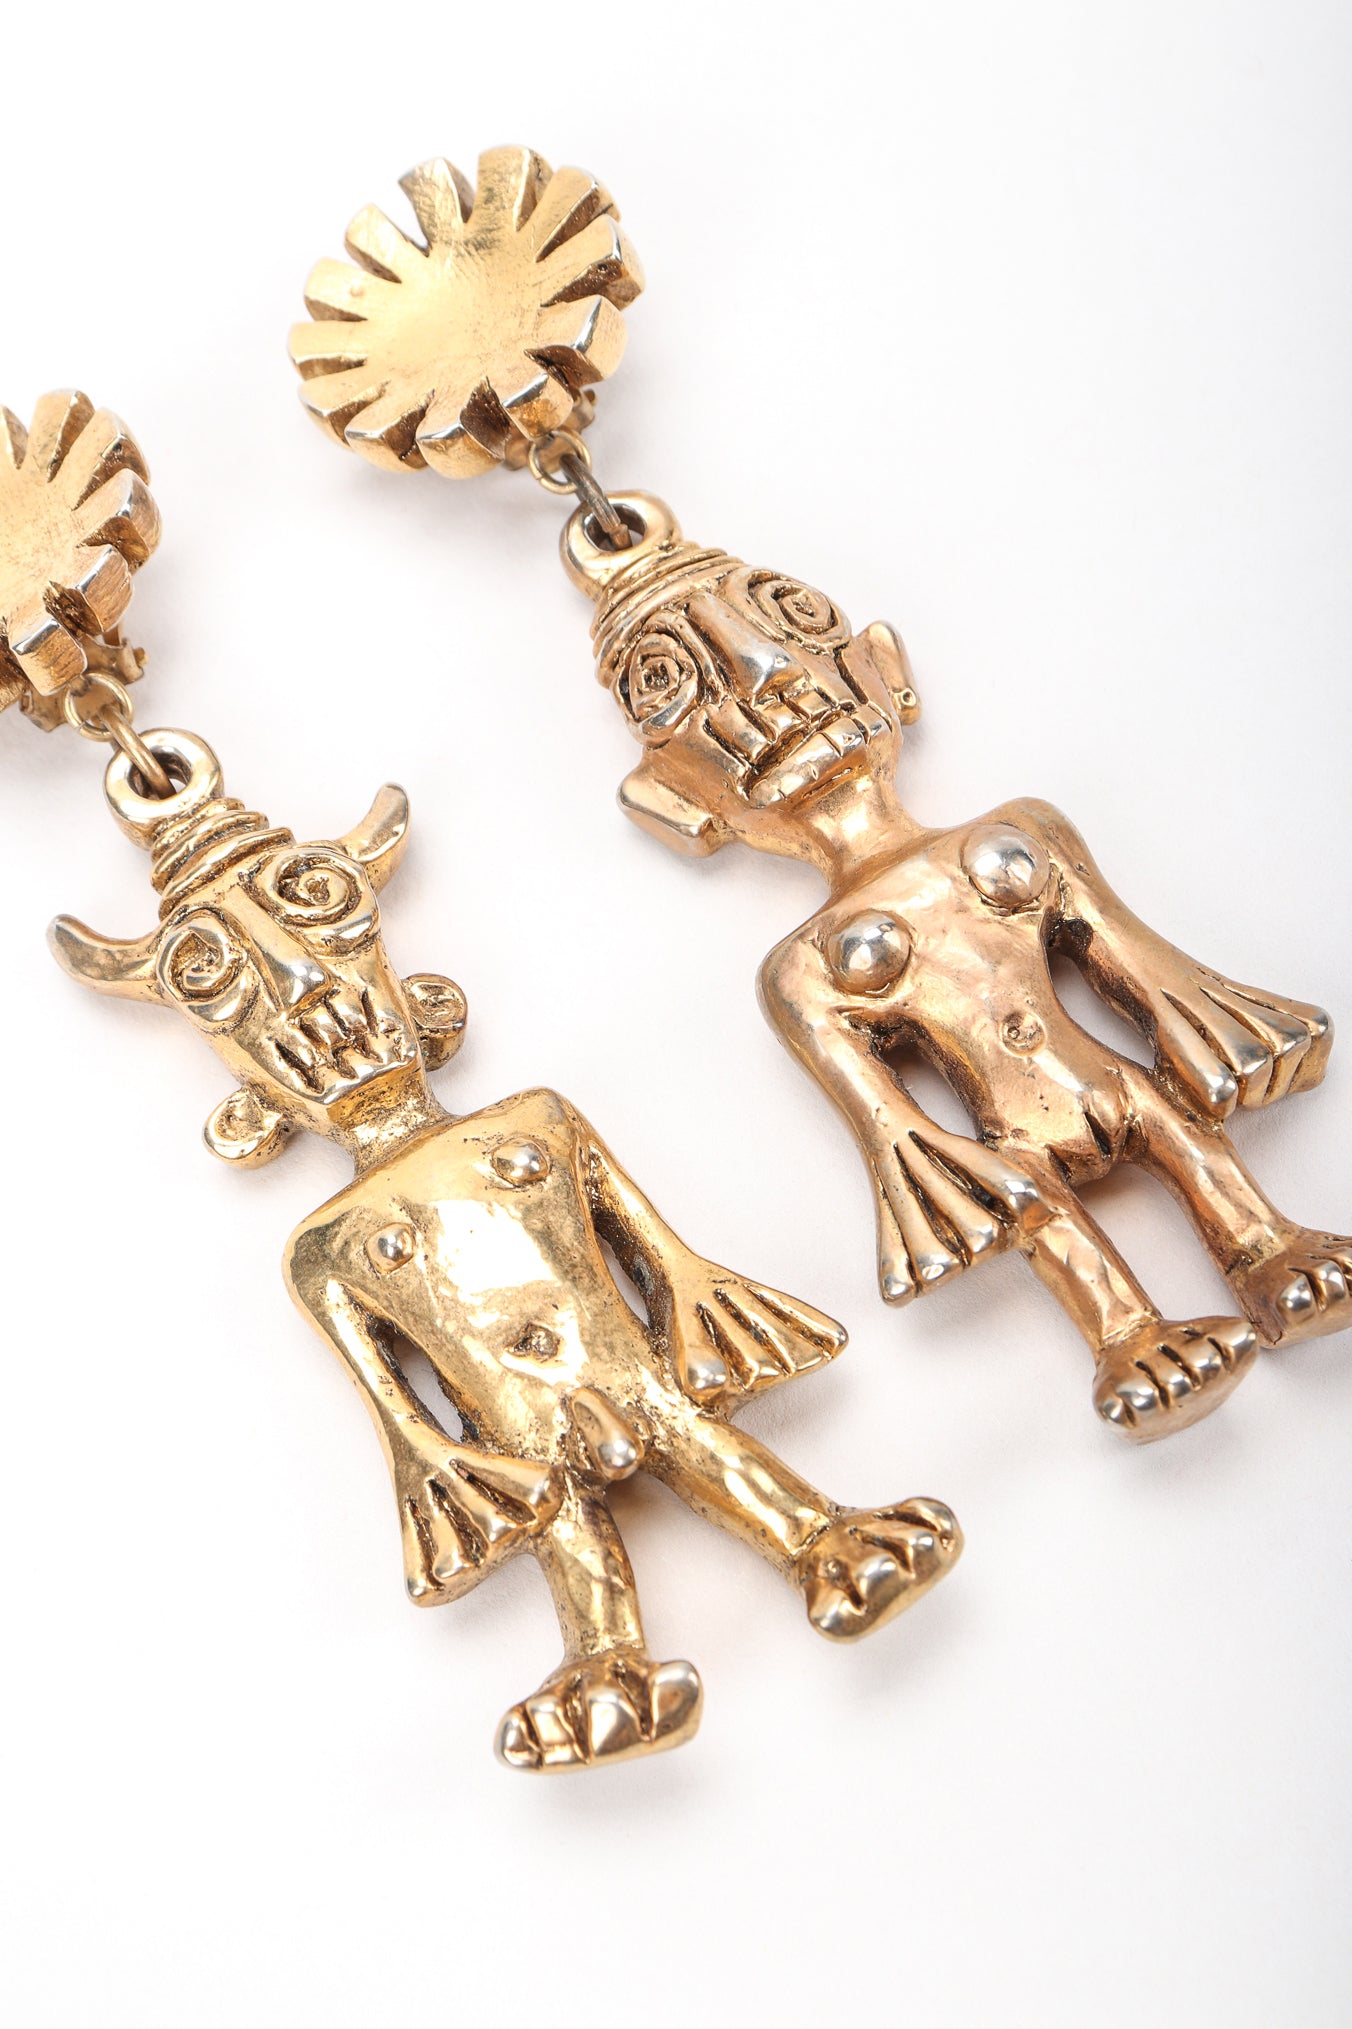 Recess Vintage Scooter Gold Mayan Incan Aztec Style Figurine Earrings on White Background